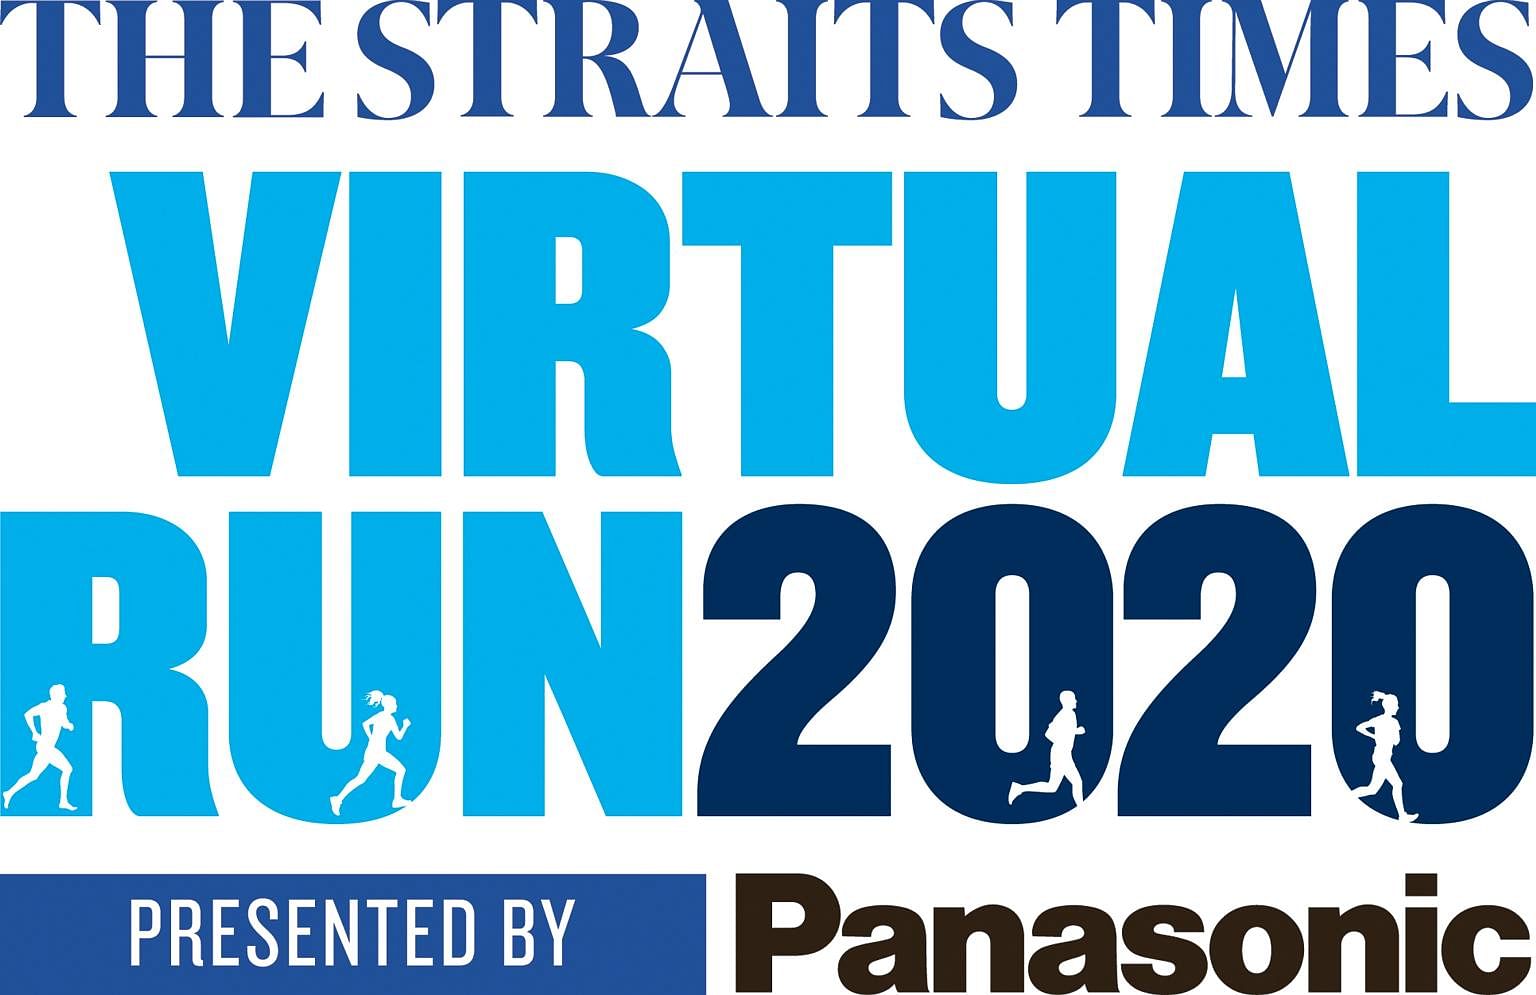 A Panasonic 55-inch 4K smart OLED television set is the grand prize at this year's The Straits Times Virtual Run lucky draw. PHOTO COURTESY OF PANASONIC